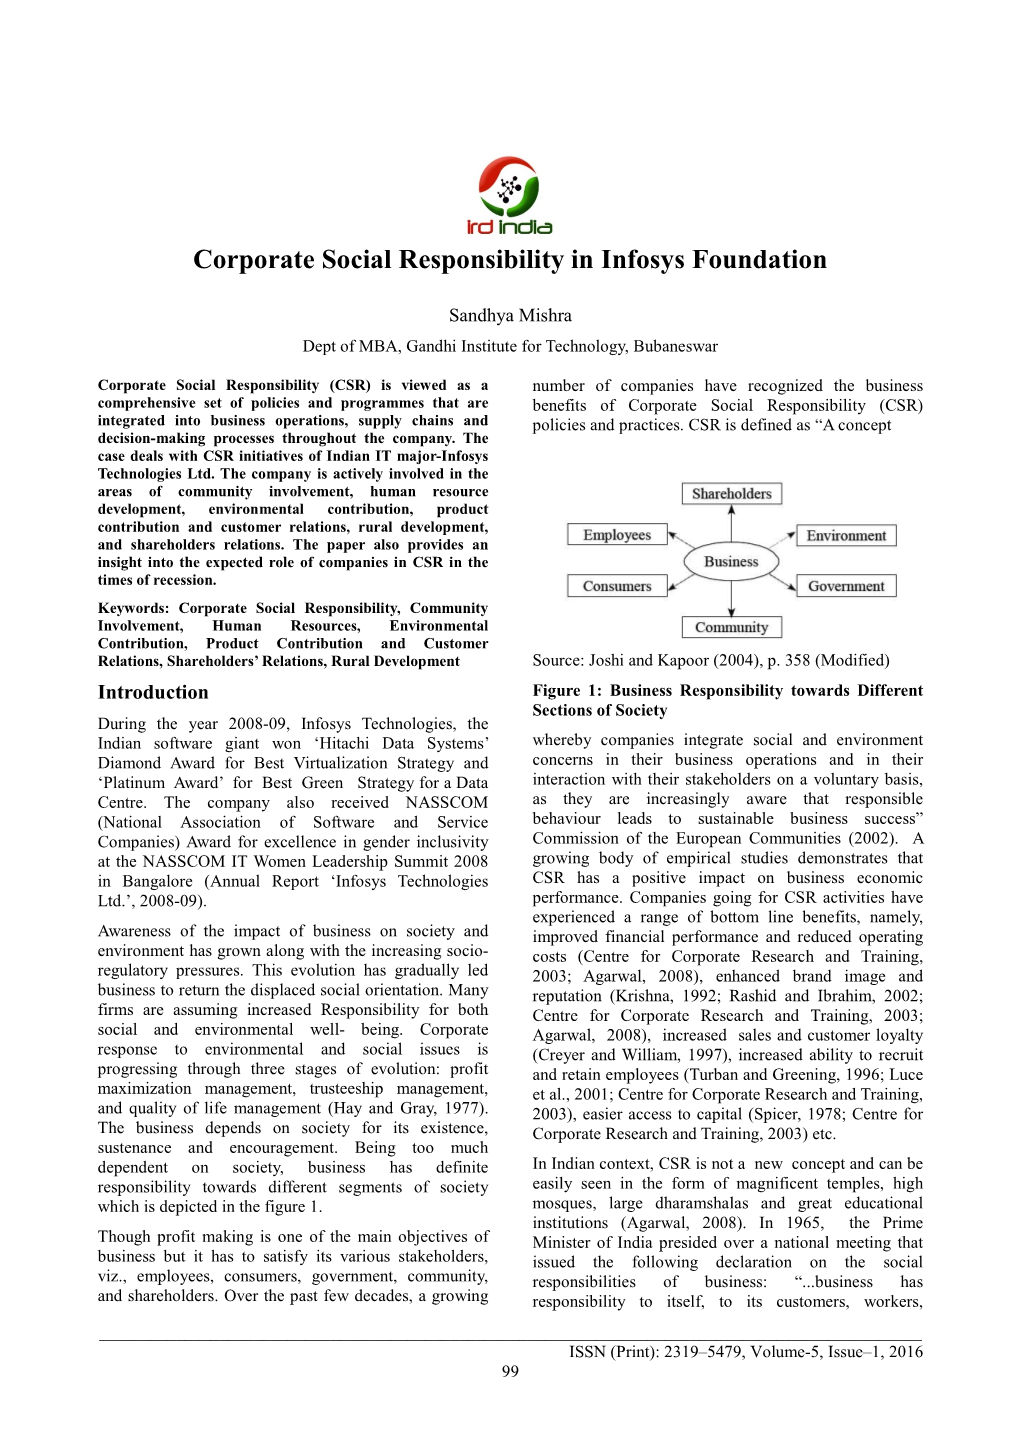 Corporate Social Responsibility in Infosys Foundation